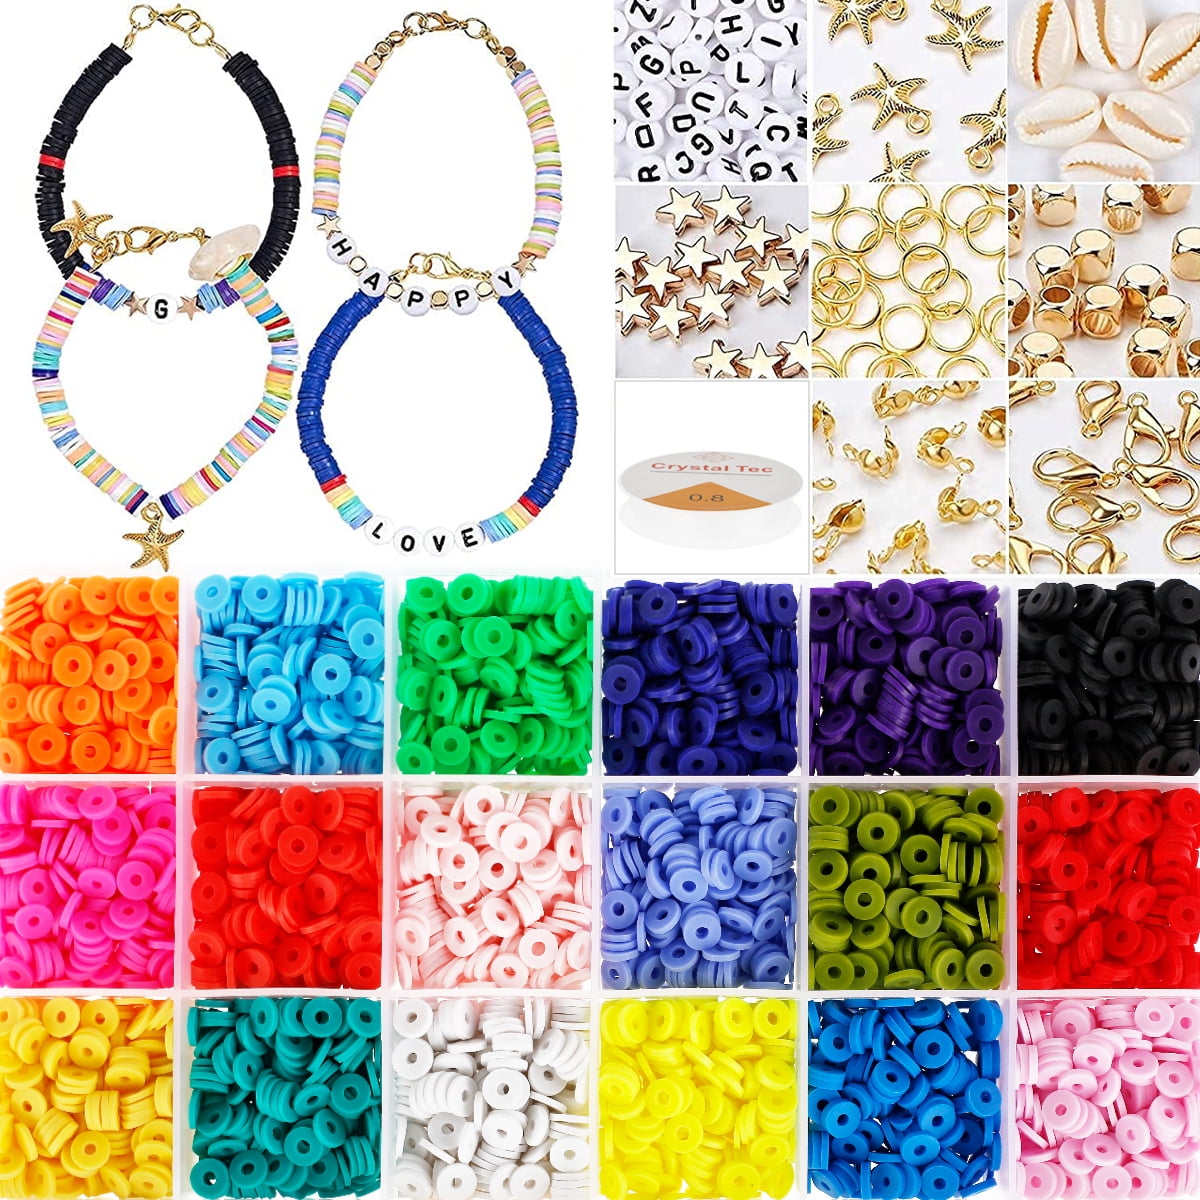 Clay Beads Vivid Colors for Jewelry Necklace Bracelet Making Kit,14 Colors  6mm